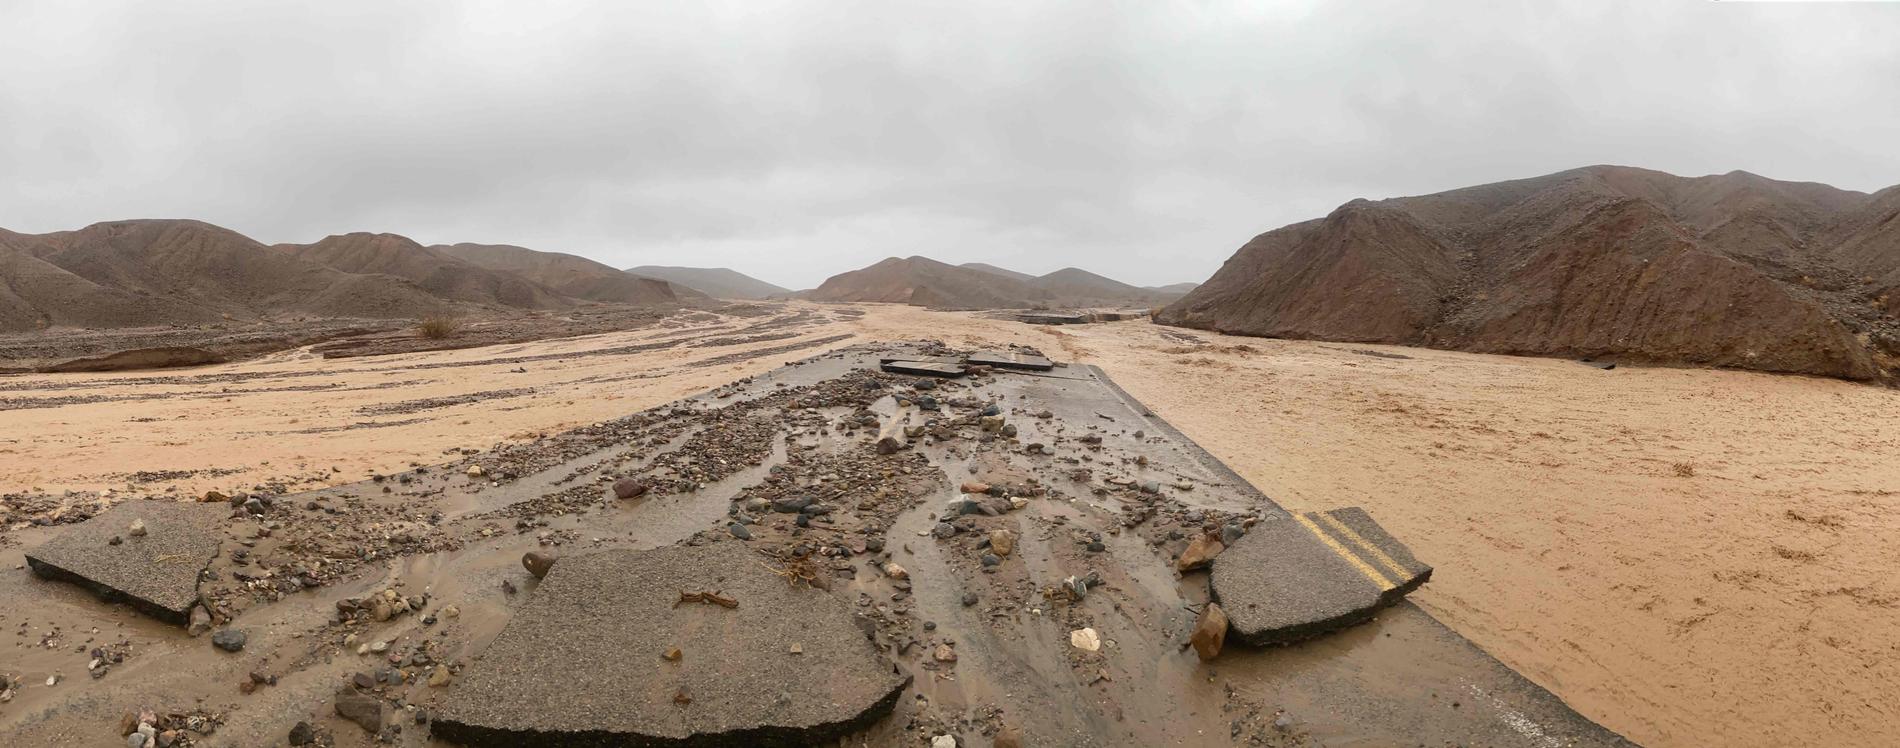 Thousands of people trapped after flash flood in Death Valley – VG